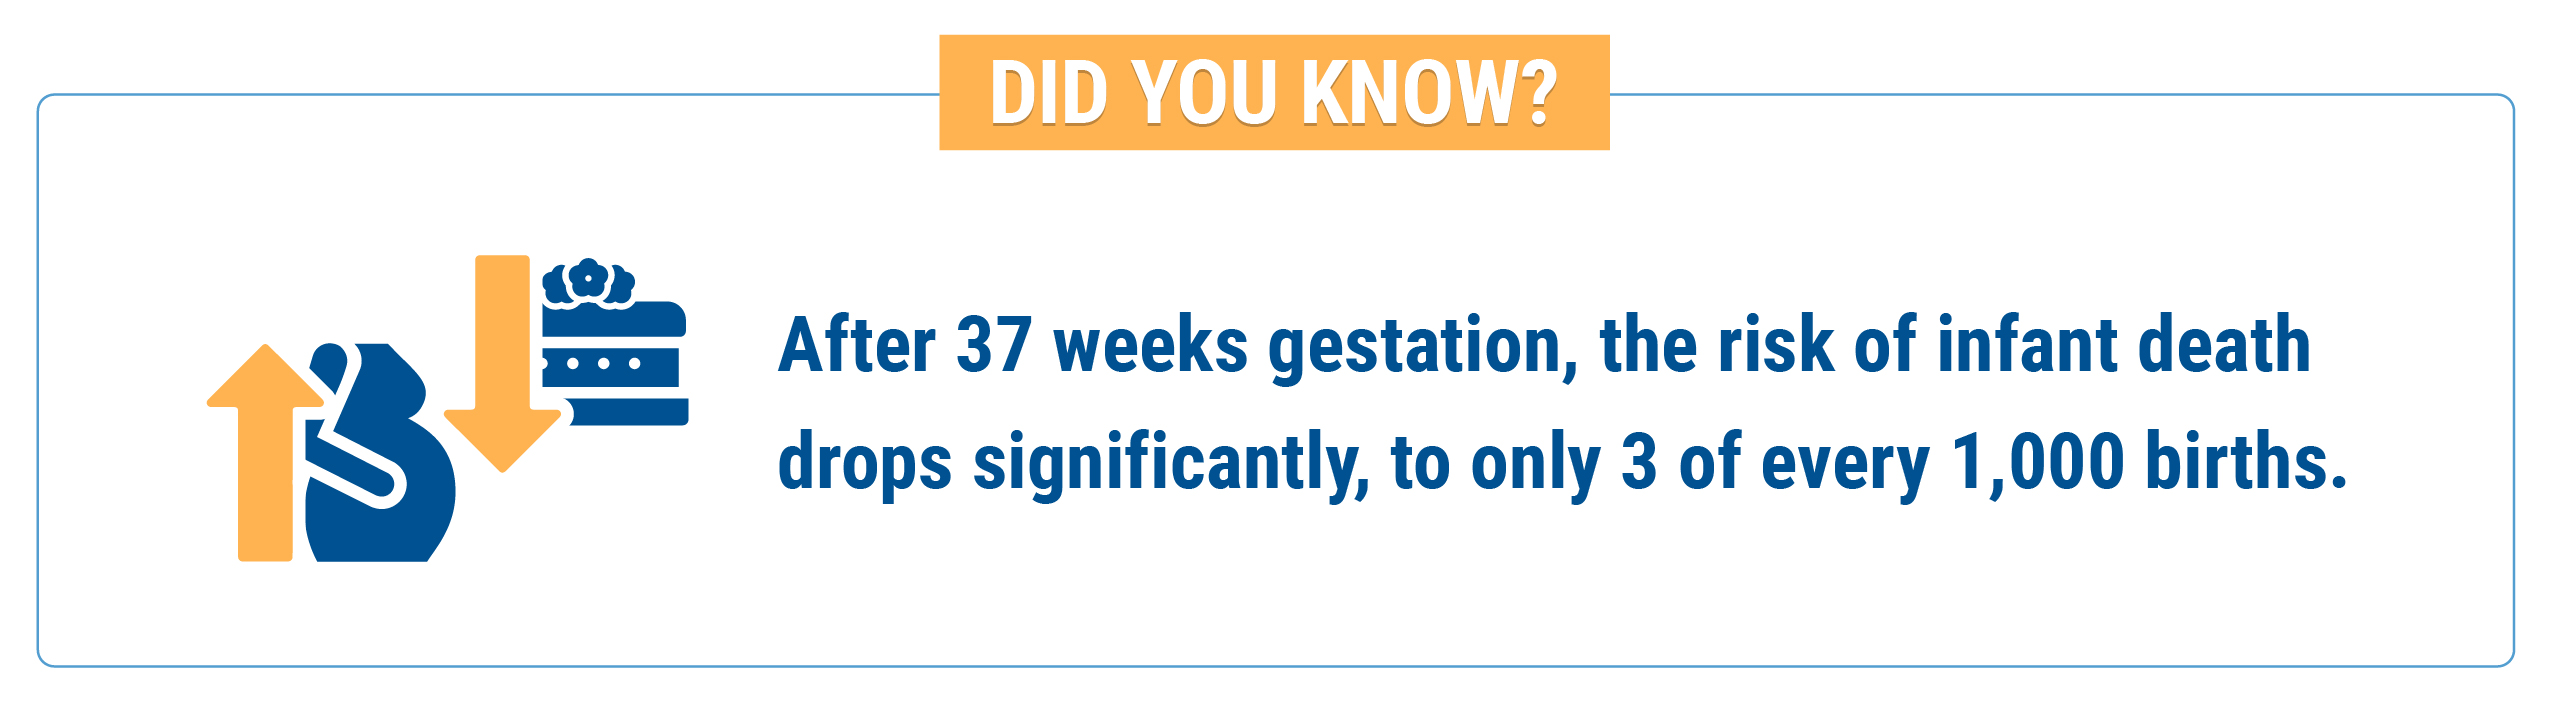 Did you know? After 37 weeks gestation, the risk of infant death drops significantly, to only 3 of every 1,000 births.